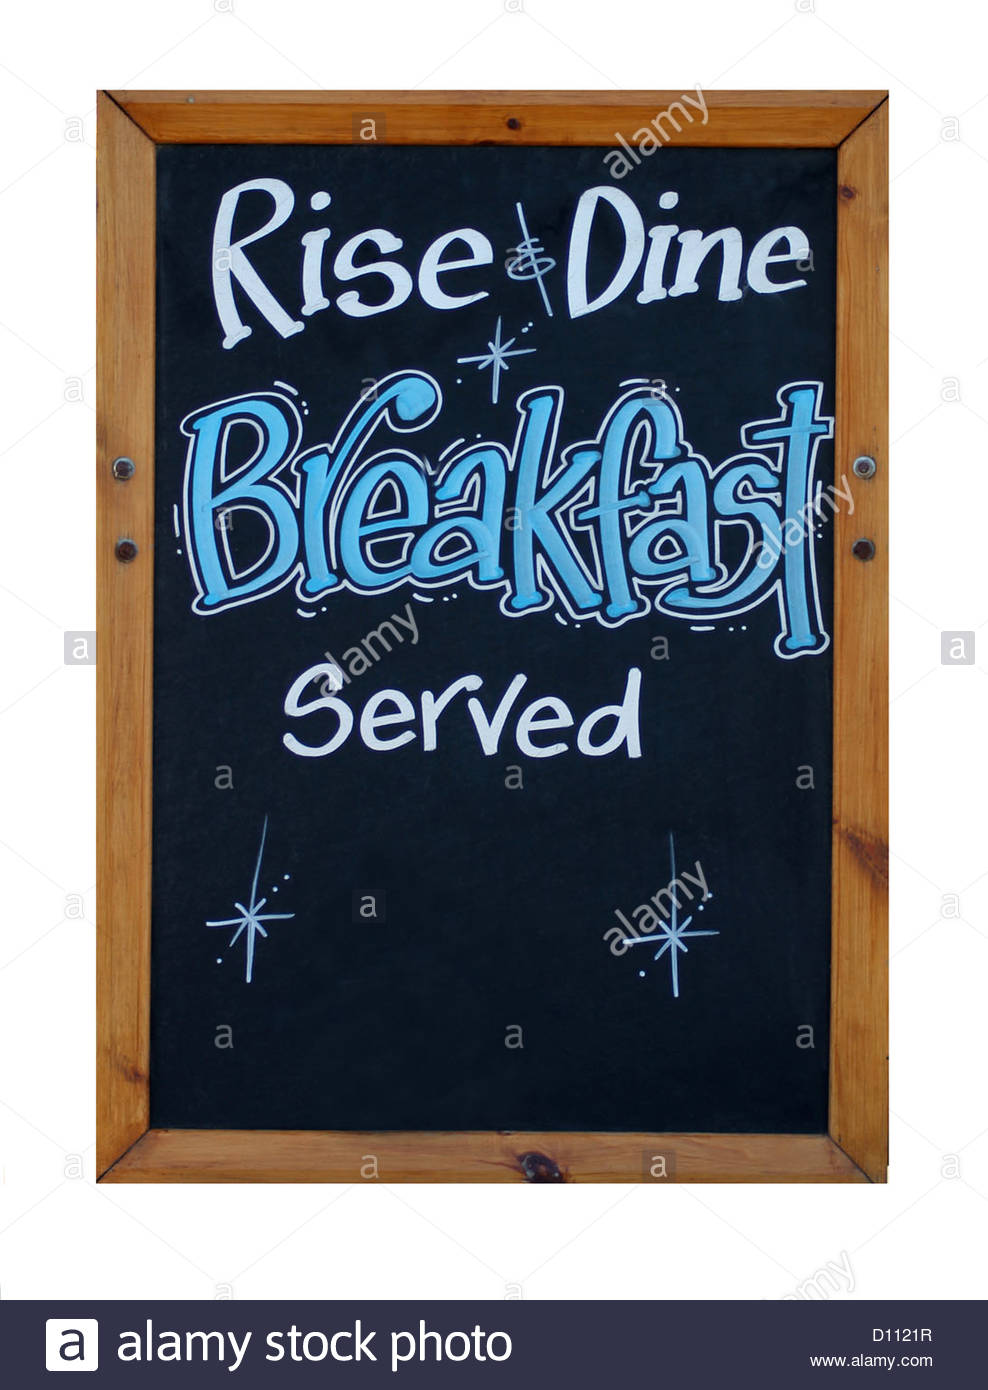 Rise And Dine Breakfast Served Sign Isolated On White Background